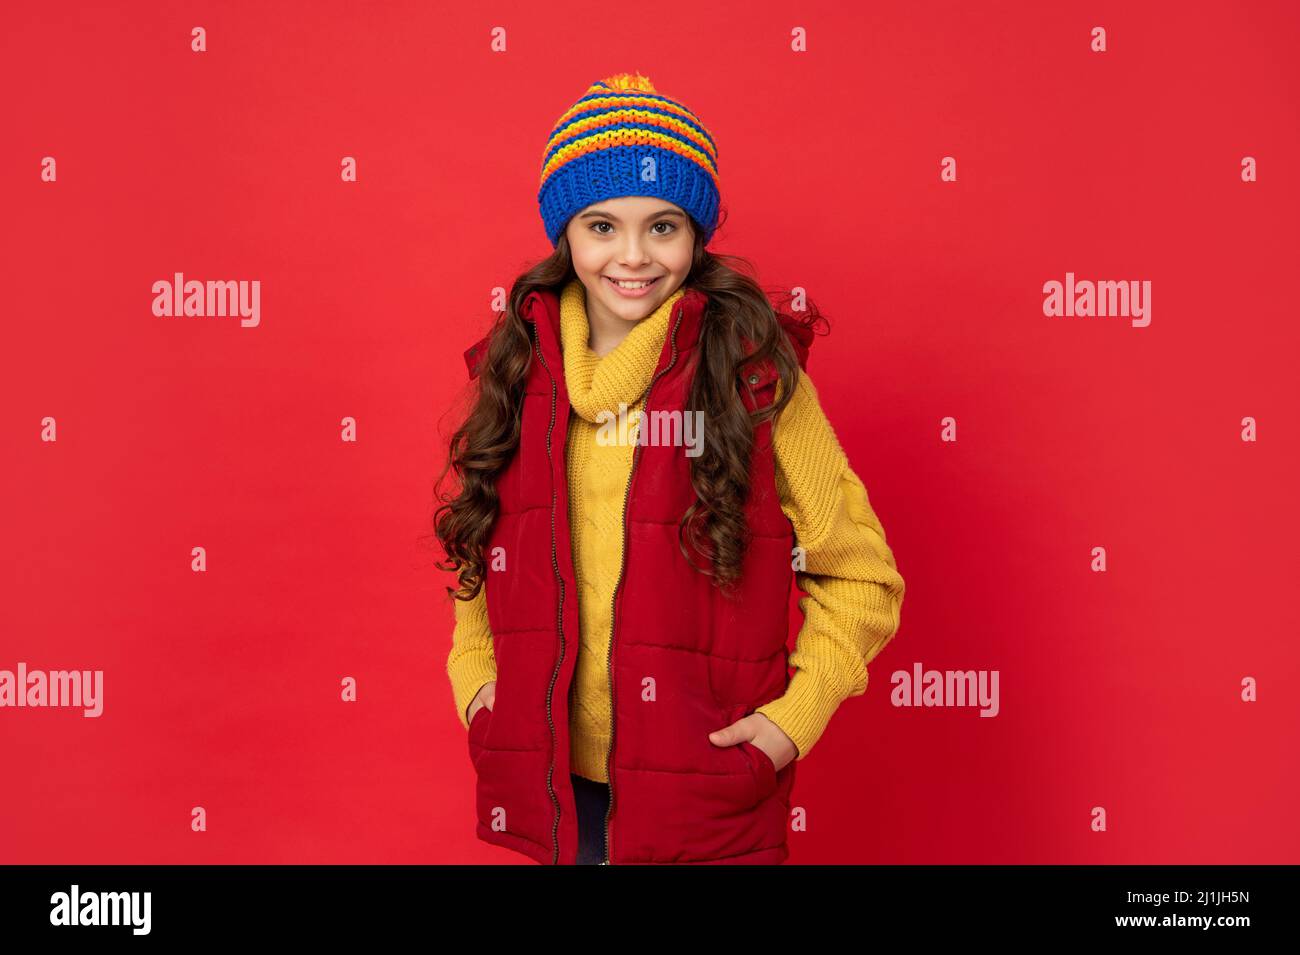 winter fashion. happy kid with curly hair in hat. female fashion model ...